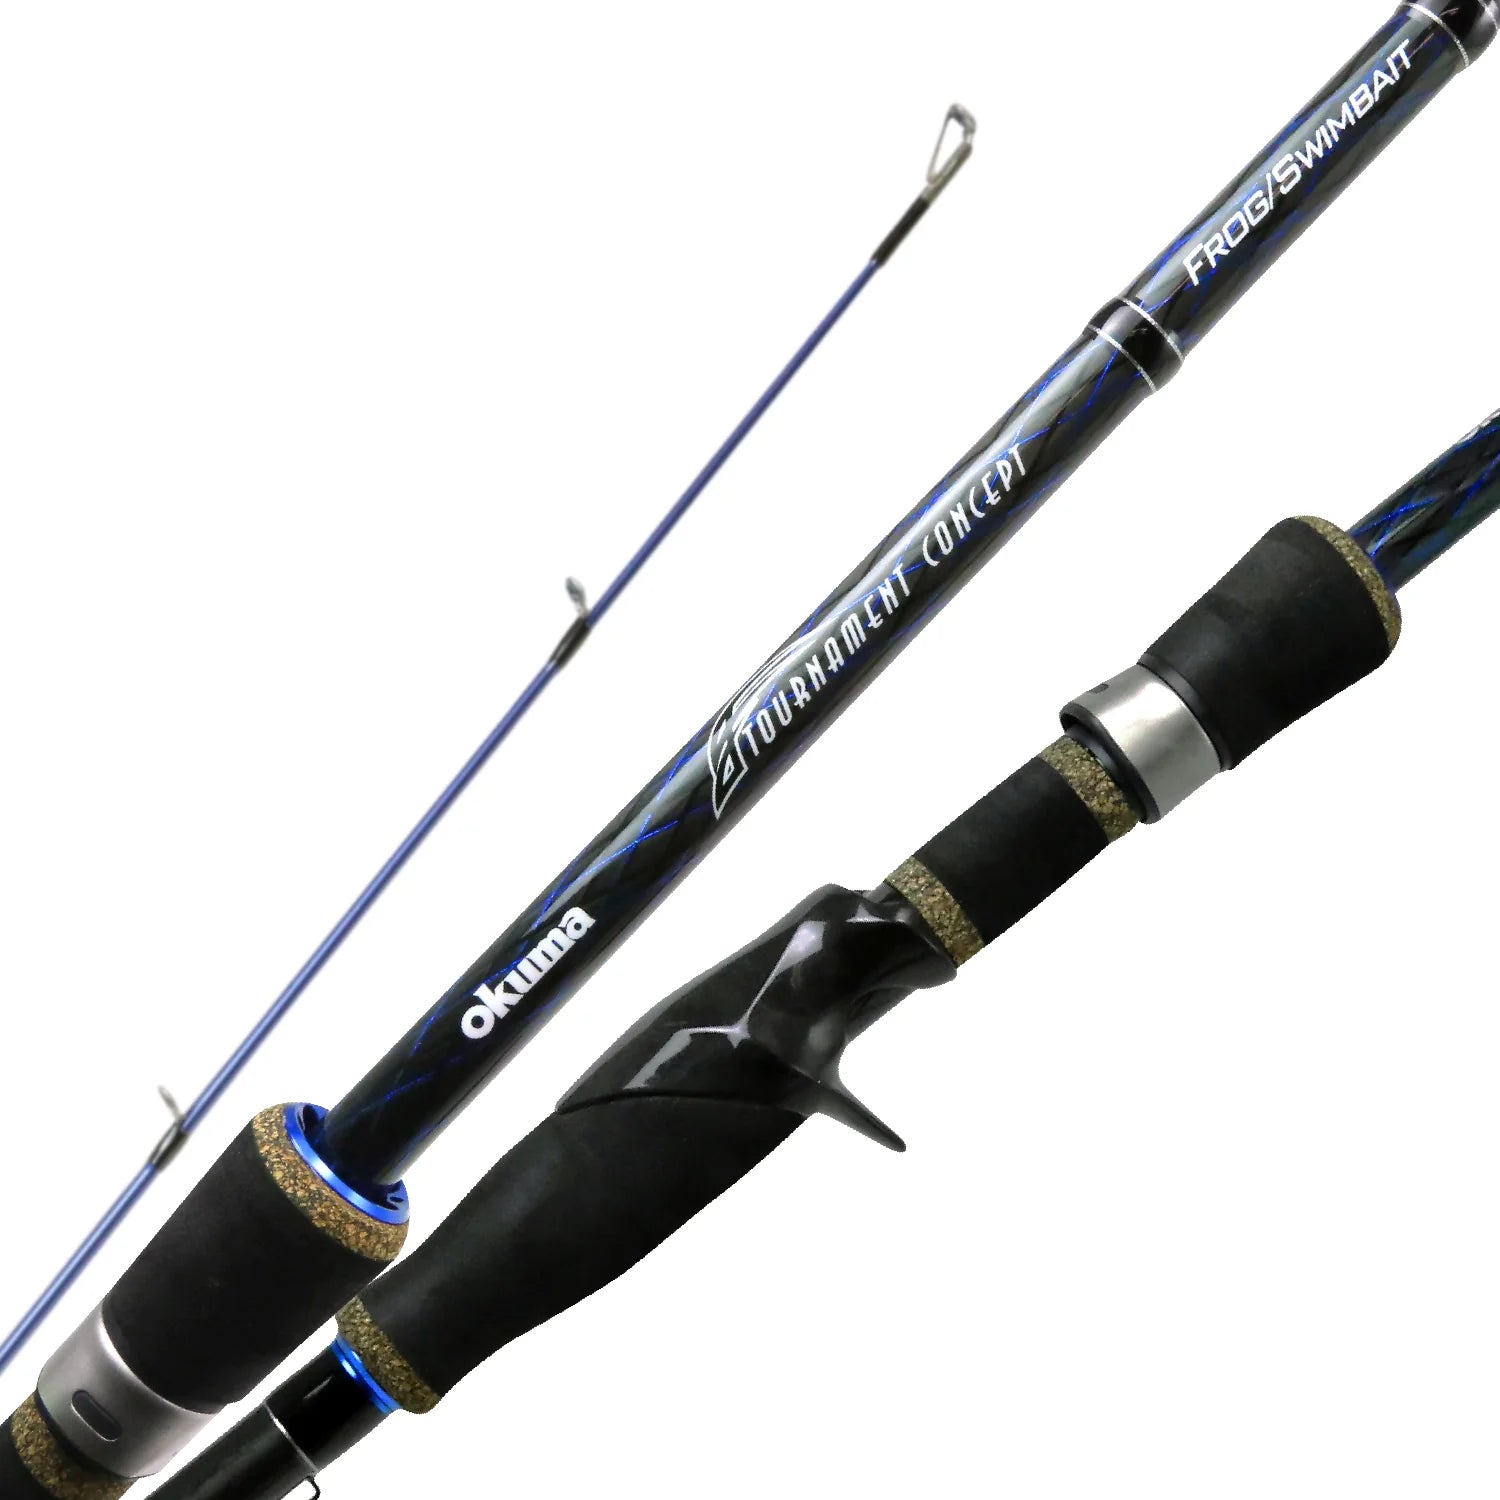 Chatter bait rod - Fishing Rods, Reels, Line, and Knots - Bass